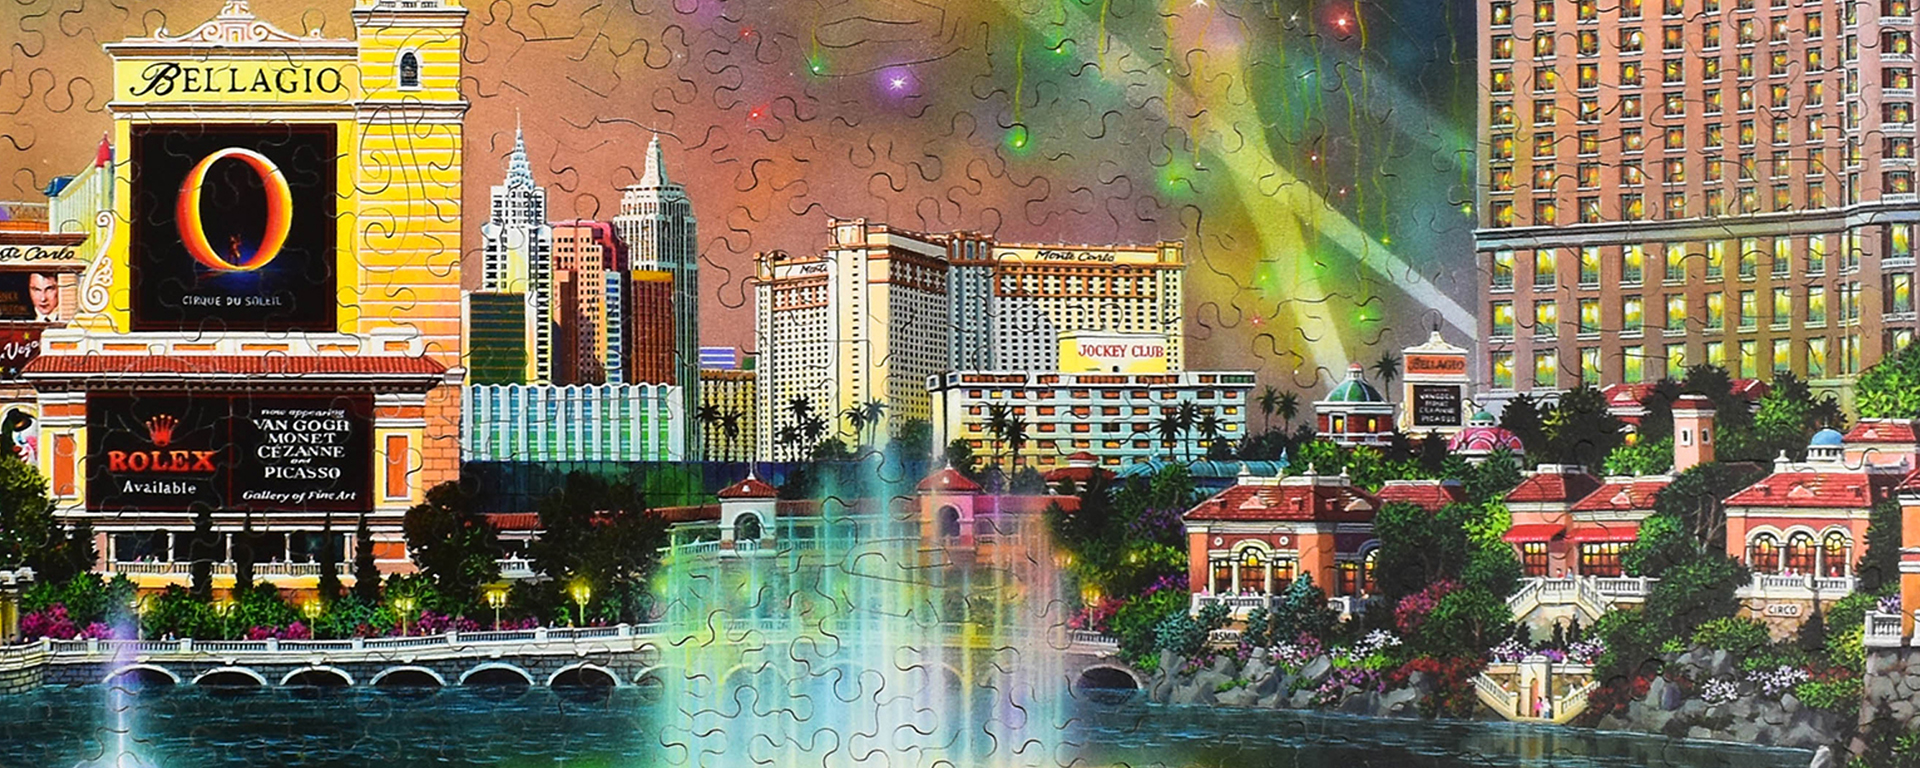 Wooden Las Vegas puzzle featuring the Bellagio Hotel and Fountains as well as the surrounding area.